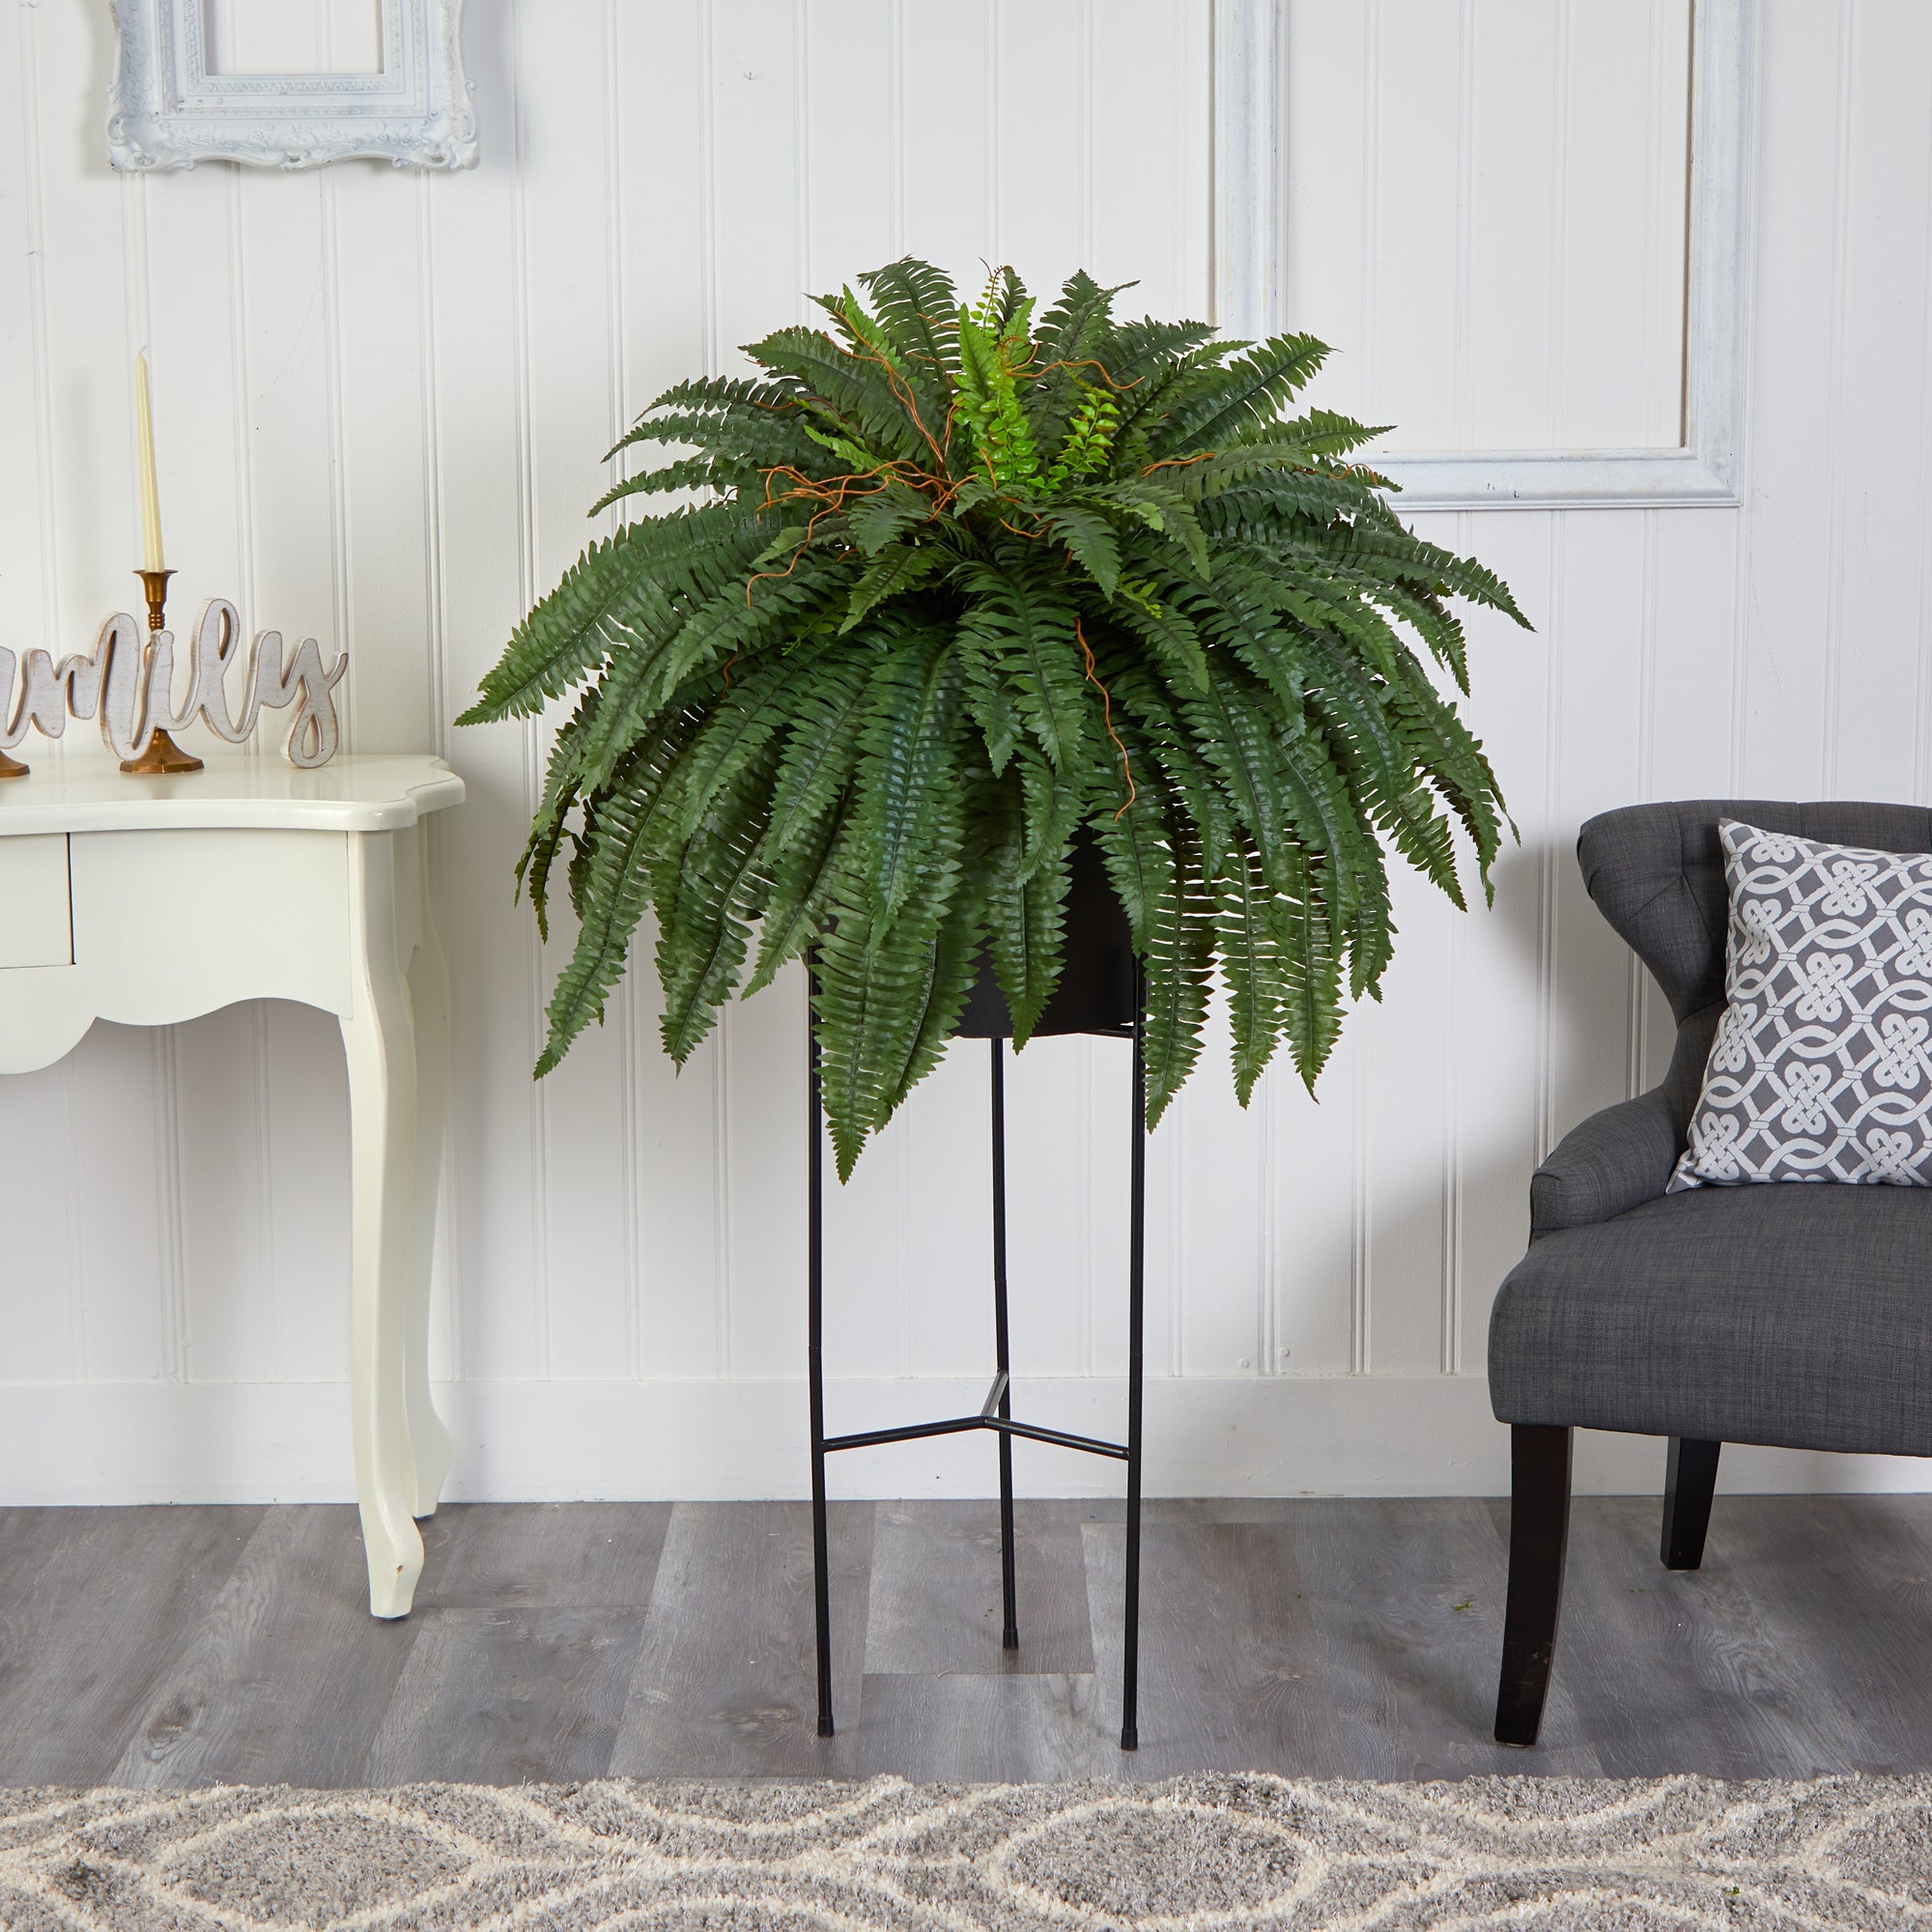 Boston Fern Artificial Plant in Black Planter with Stand, 51"